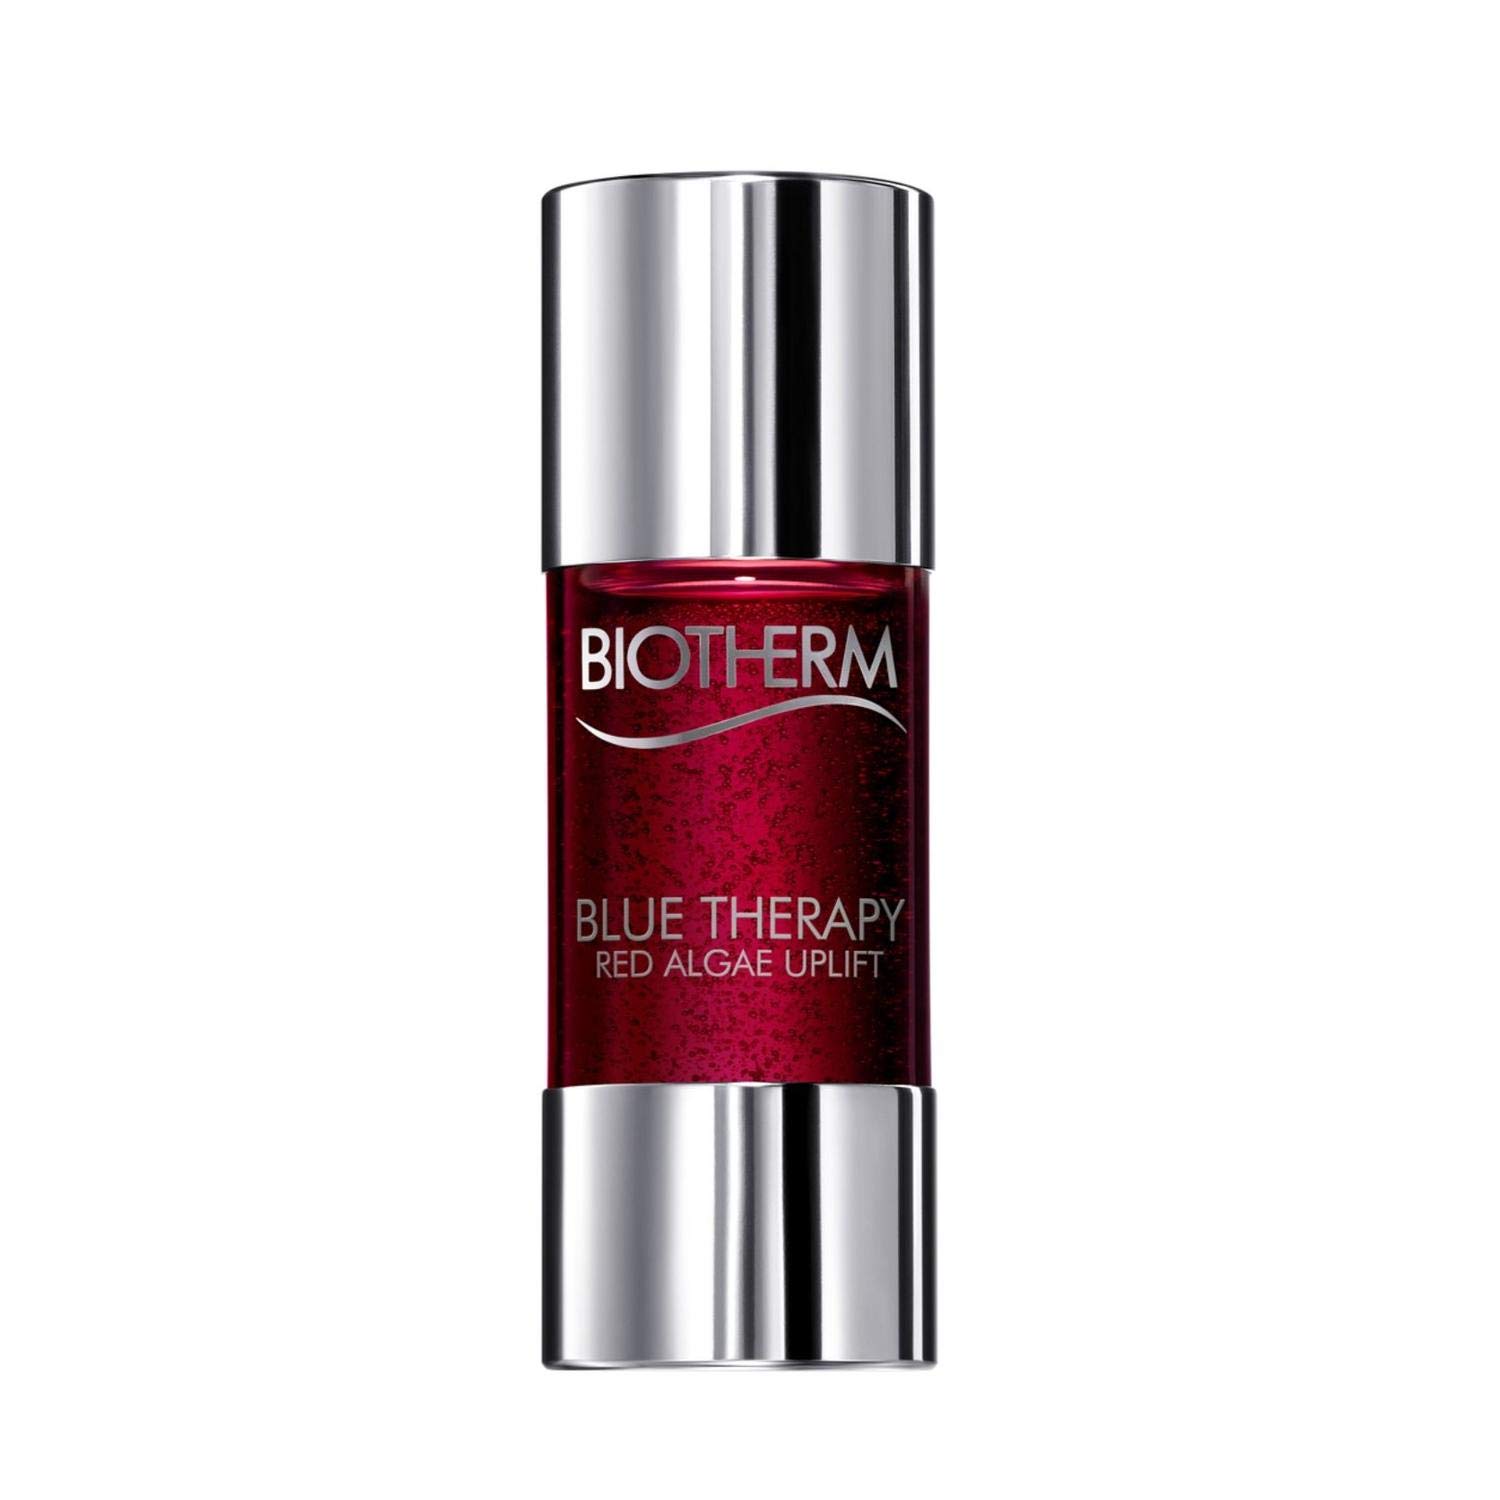 Biotherm Blue Therapy Red Algae Uplift Cure, 75 ml